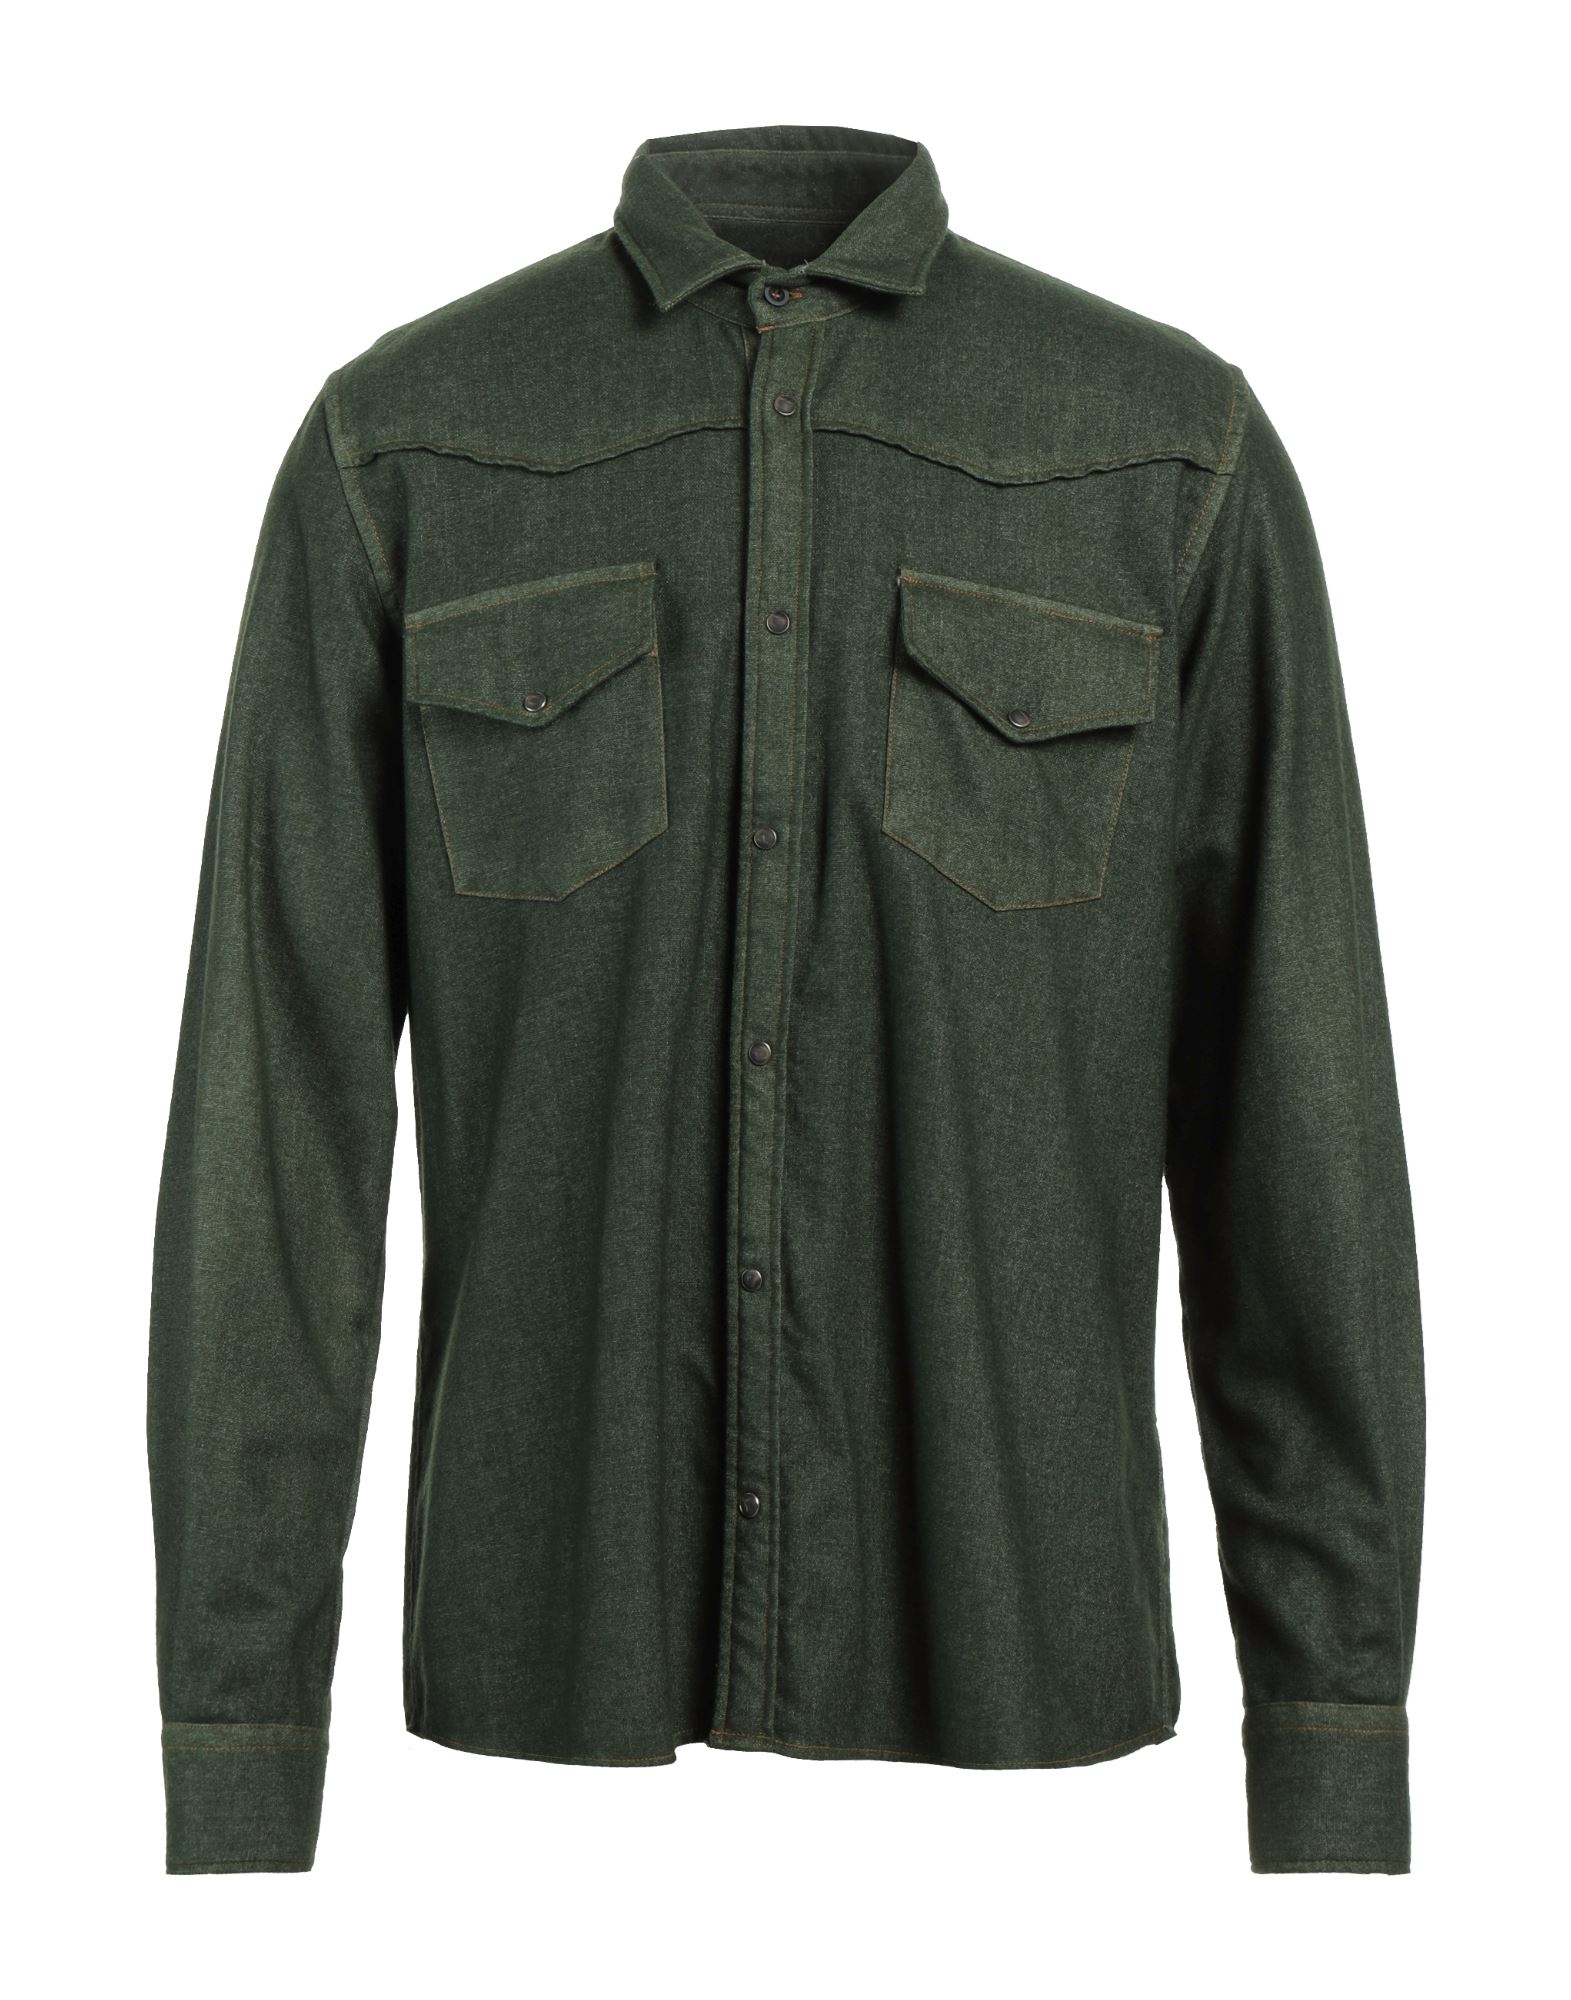 Original Vintage Style Shirts In Green